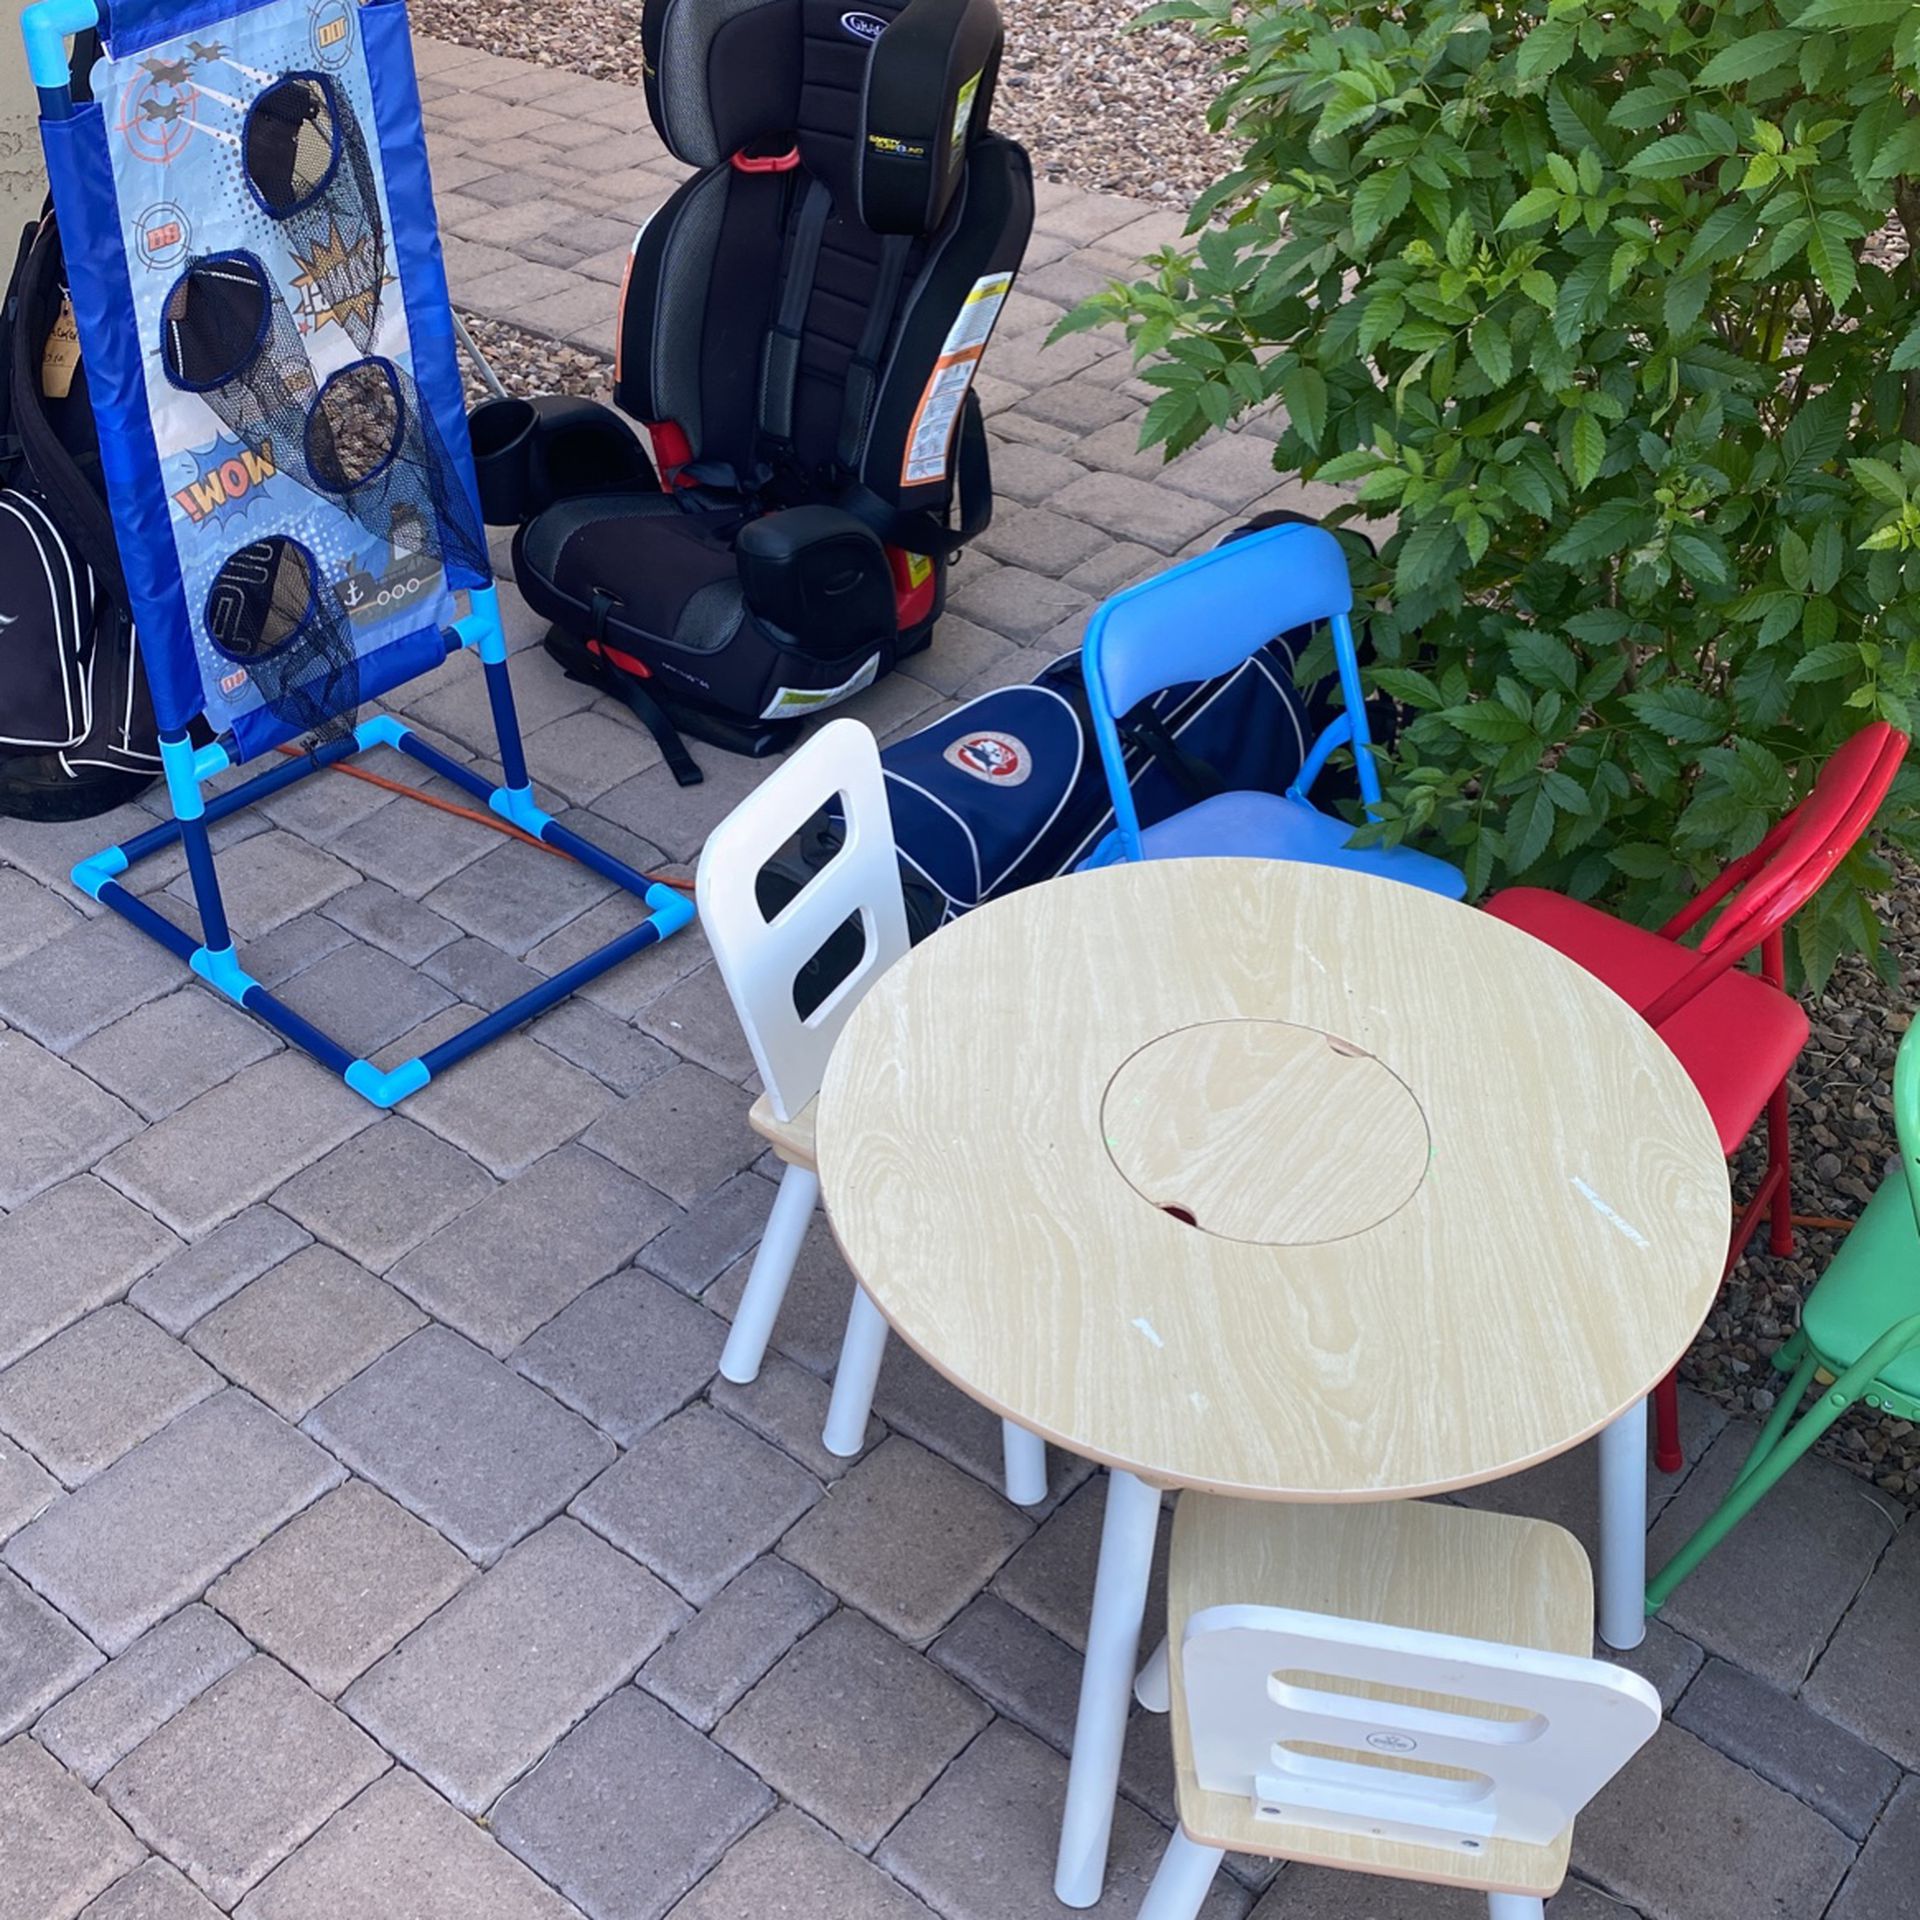 Free - Car Seat - Kids Table And Chairs And Golf Bag 